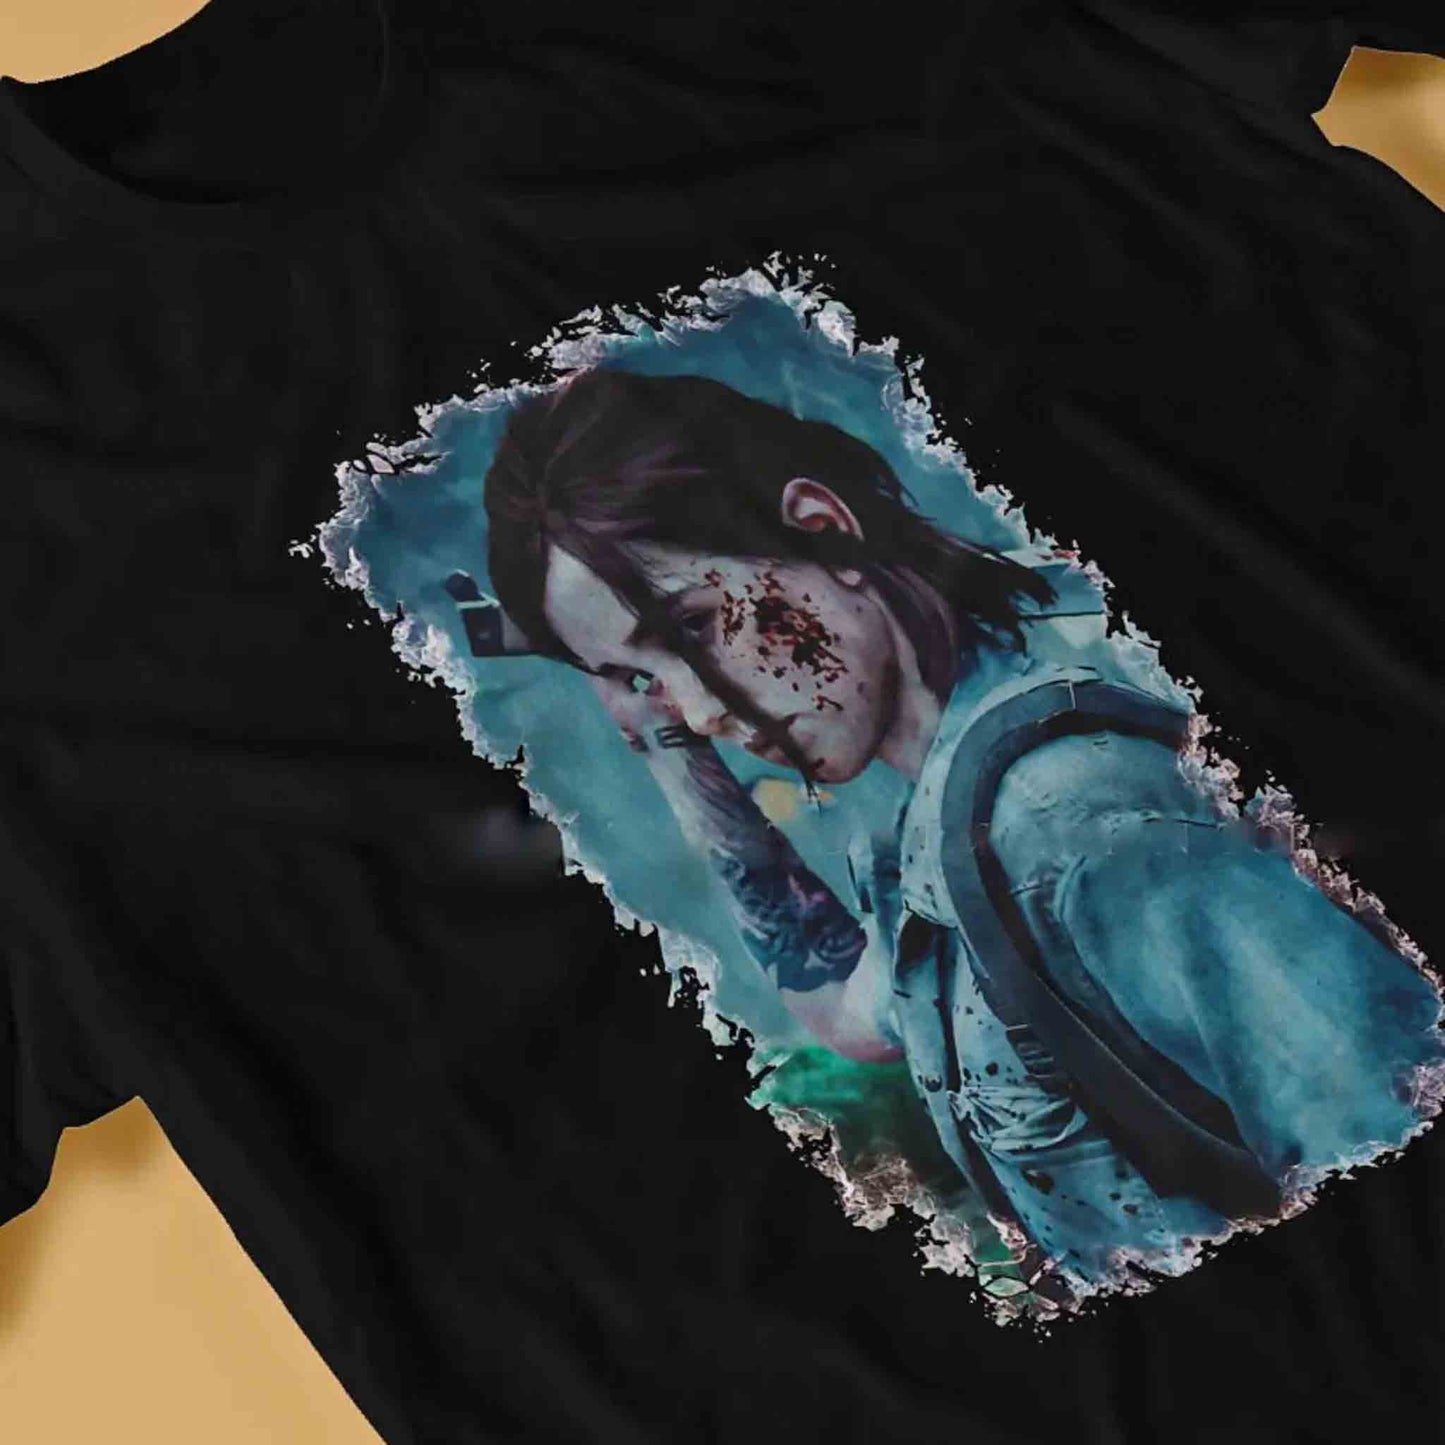 The Last of Us Cinematic Ellie Tshirt - Available at 2Fast2See.co